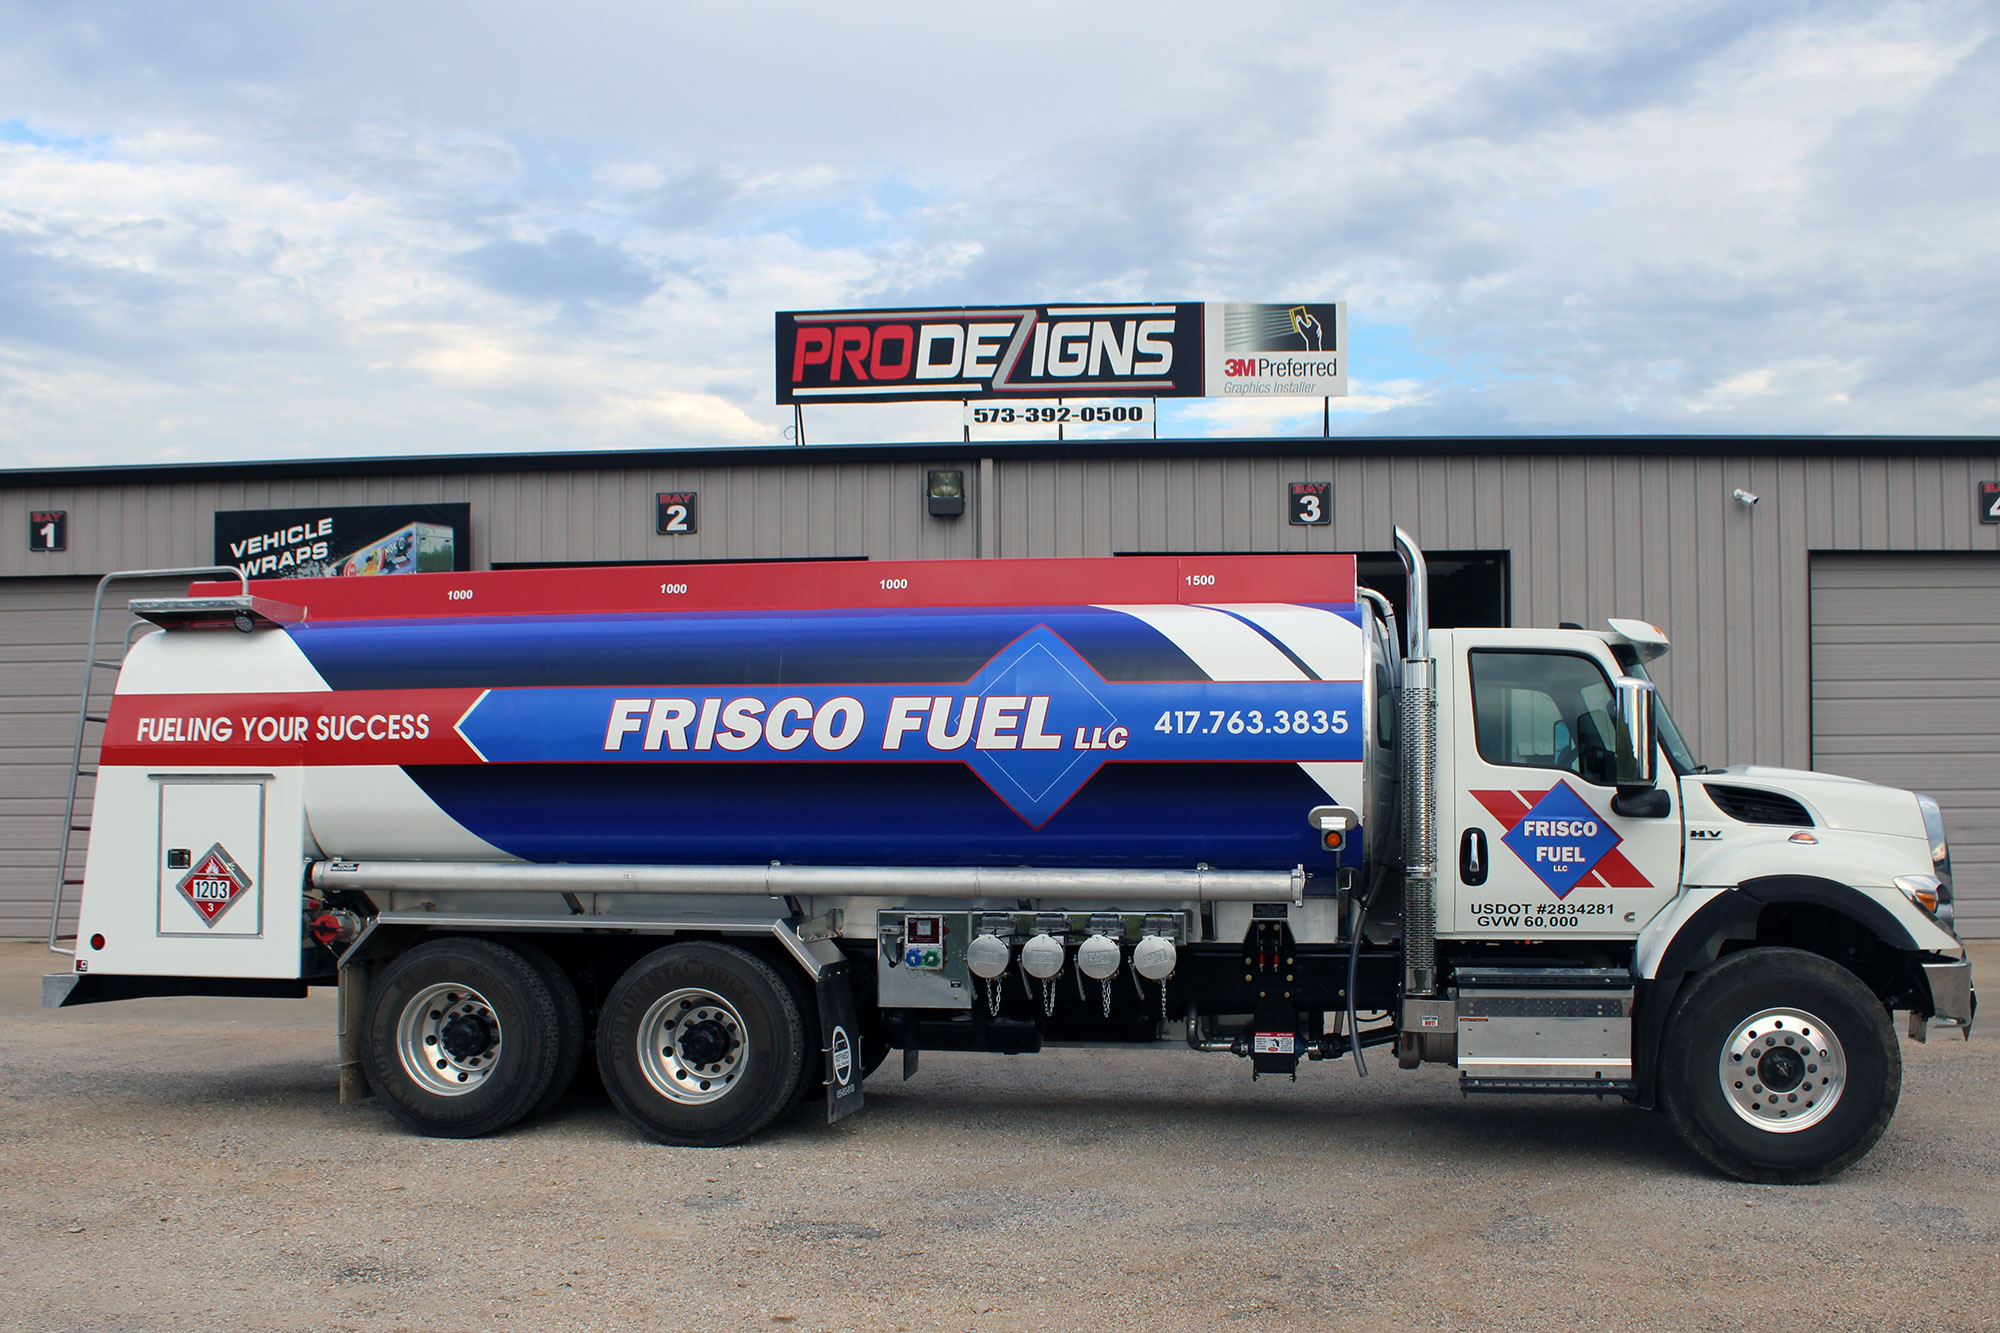 Frisco Fuel Tanker Graphics And Wraps Store Fronts Windows Outdoor Pro Dezigns Columbia Mo